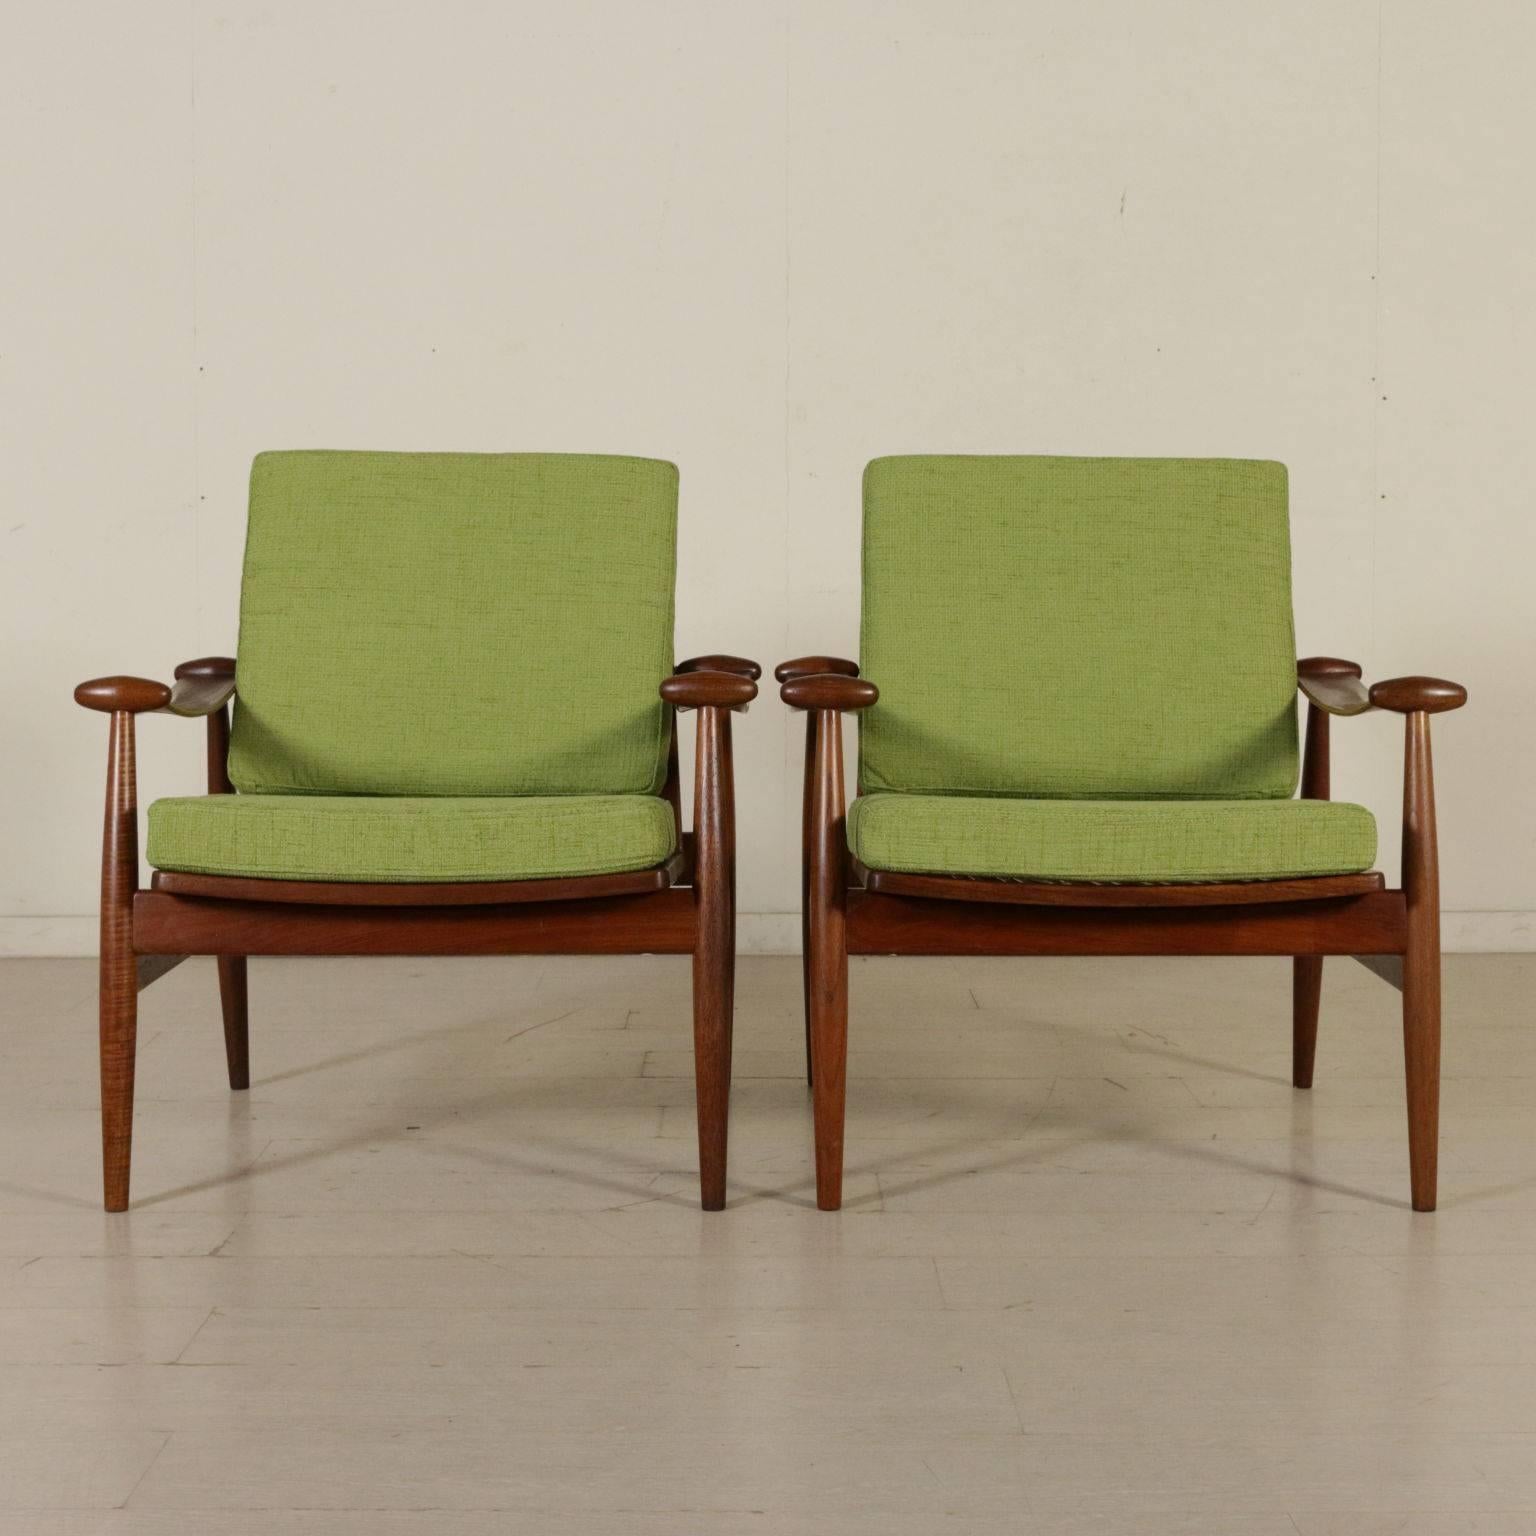 A pair of armchairs designed by Finn Juhl (1912-1989) for France & Daverkosen. Model: 133 Spade. Teak wood, foam cushions with fabric upholstery. Manufactured in Denmark, 1950s-1960s.